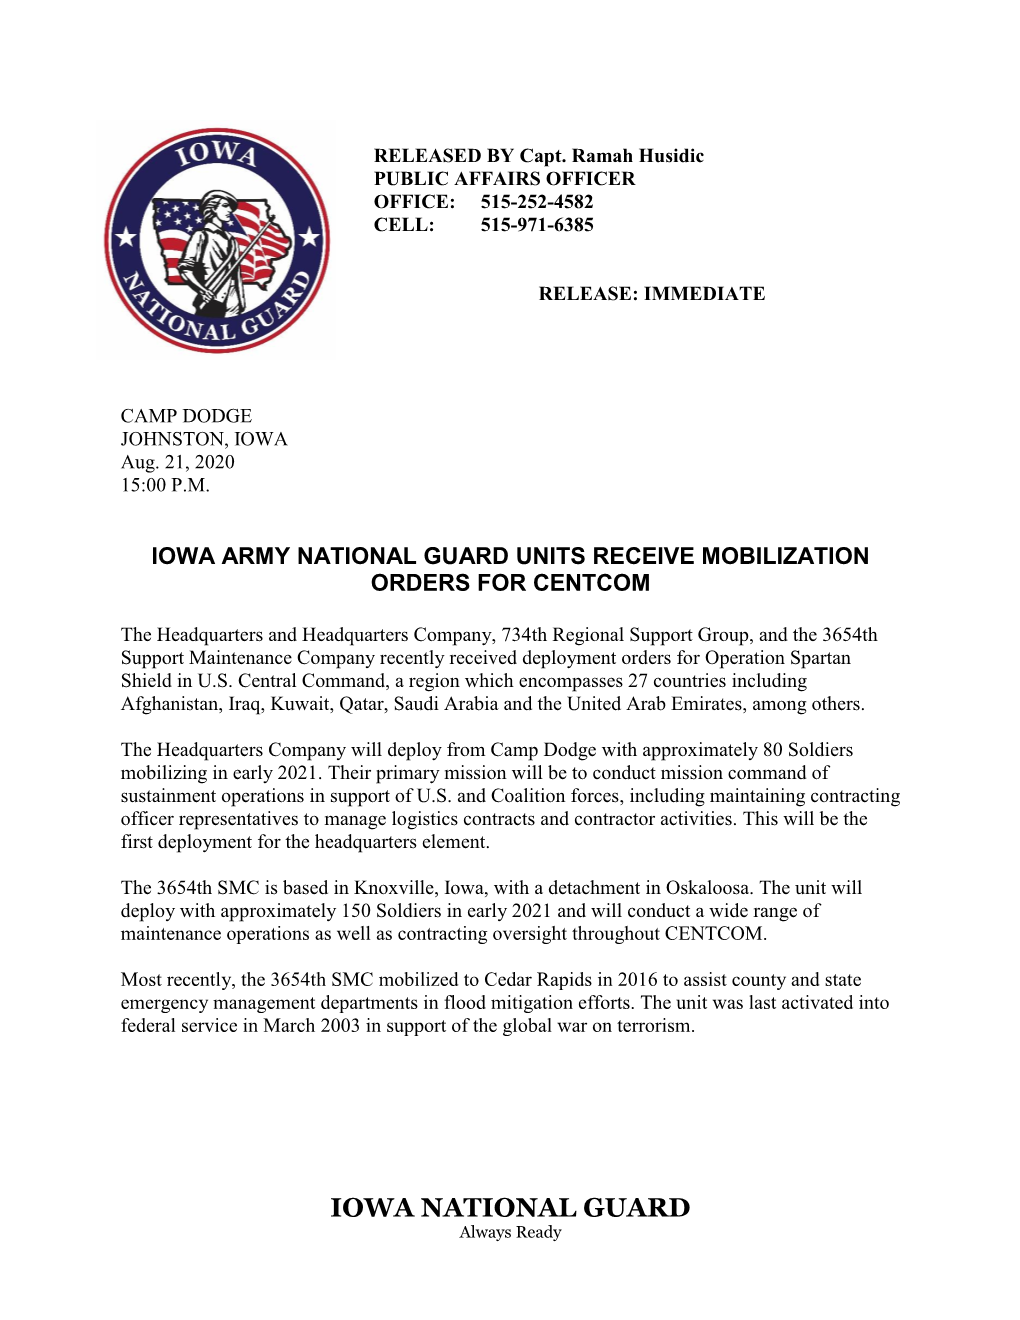 Iowa Army National Guard Units Receive Mobilization Orders for Centcom